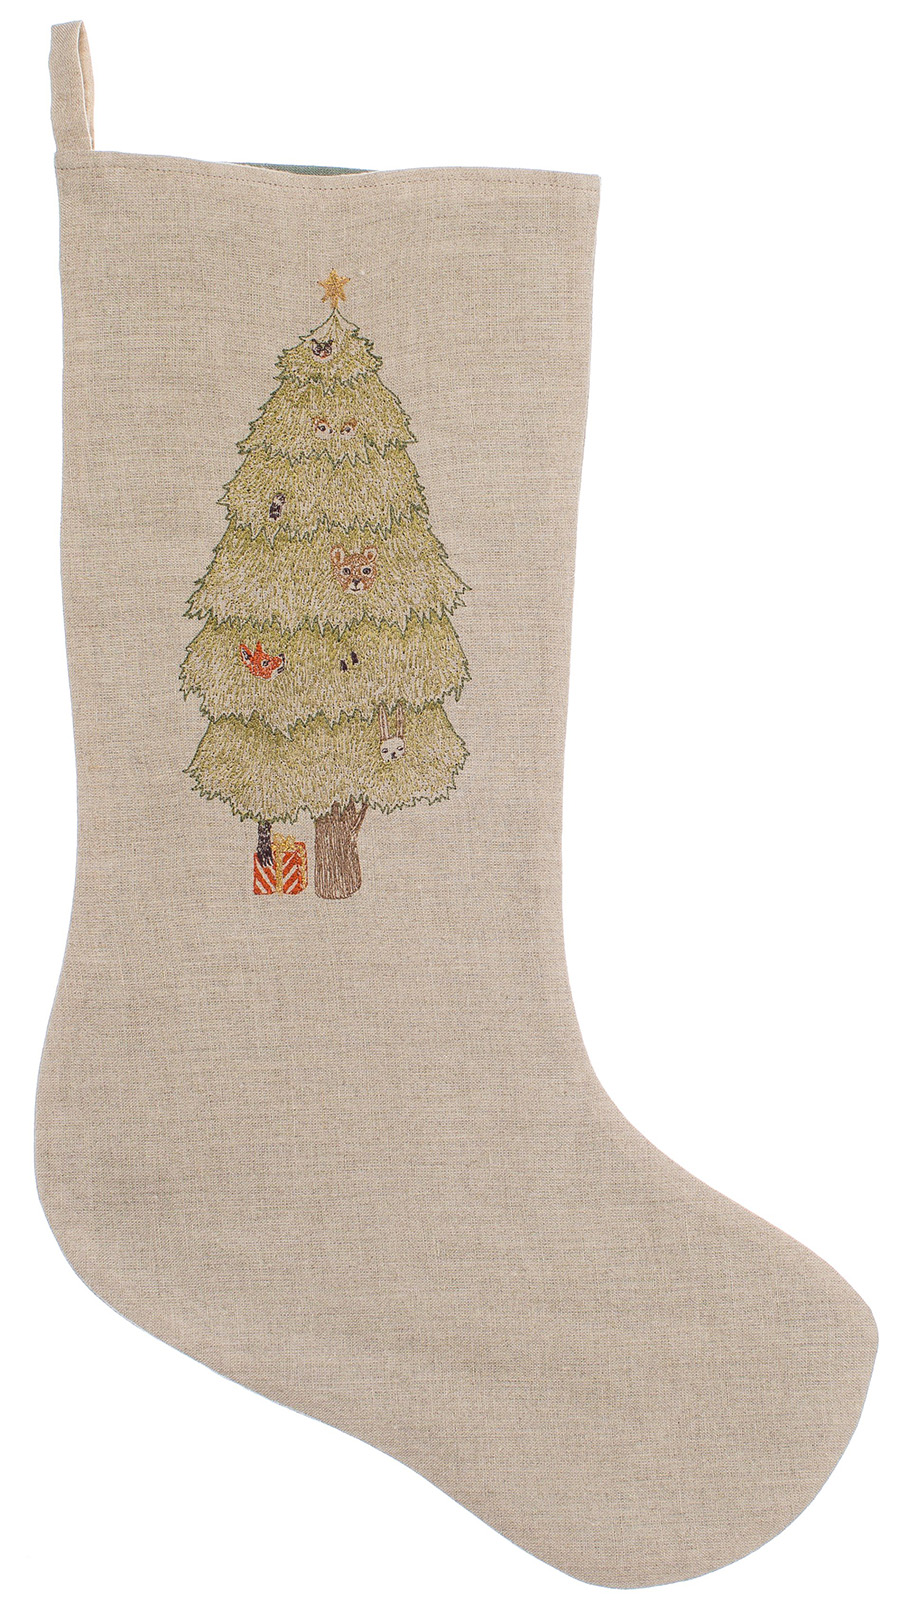 For Dad: Peek-A-Tree Large Stocking by Coral & Tusk